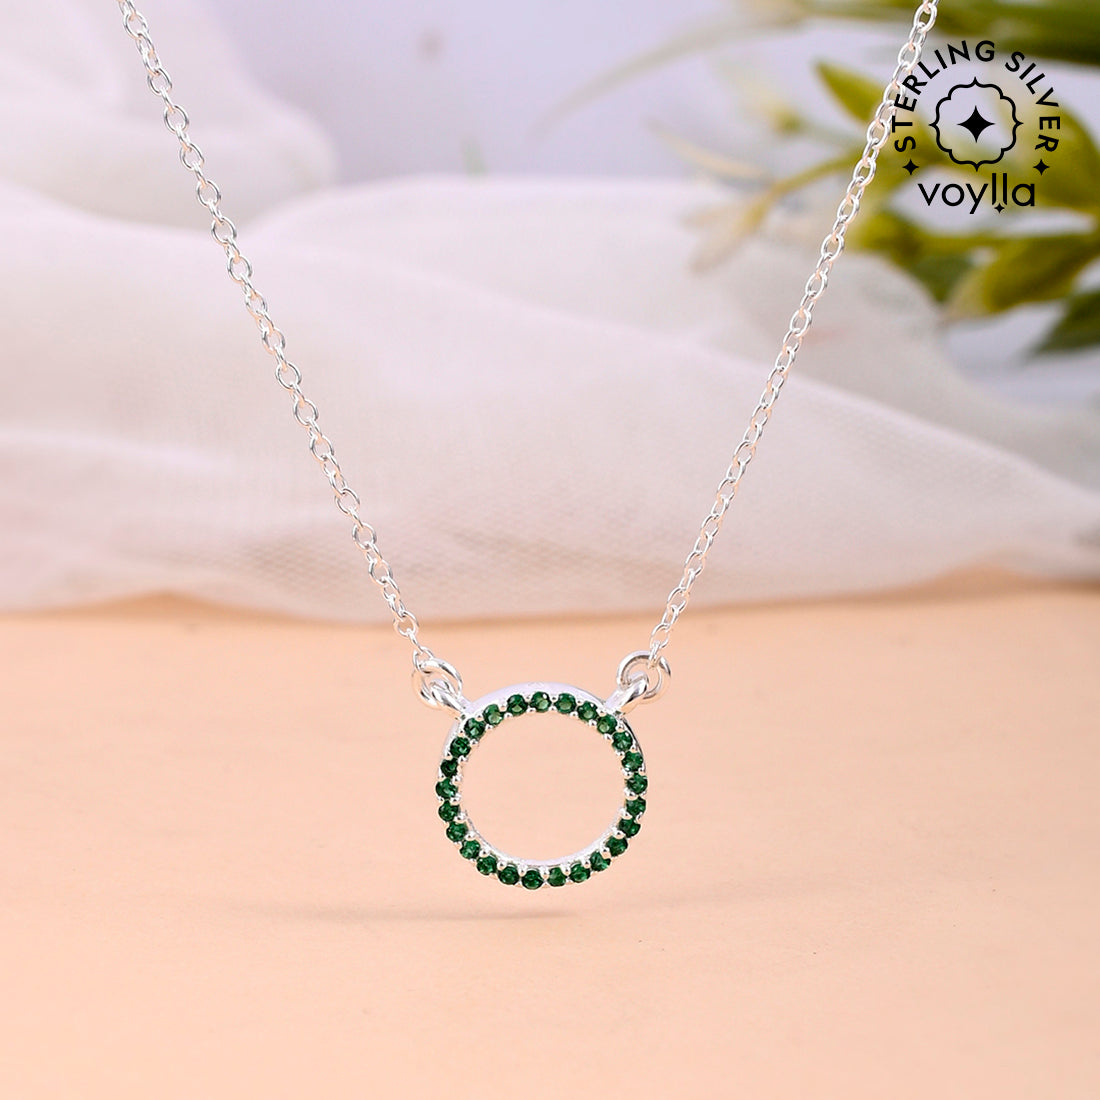 Stunning Round 925 Sterling Silver Necklace with Green CZ